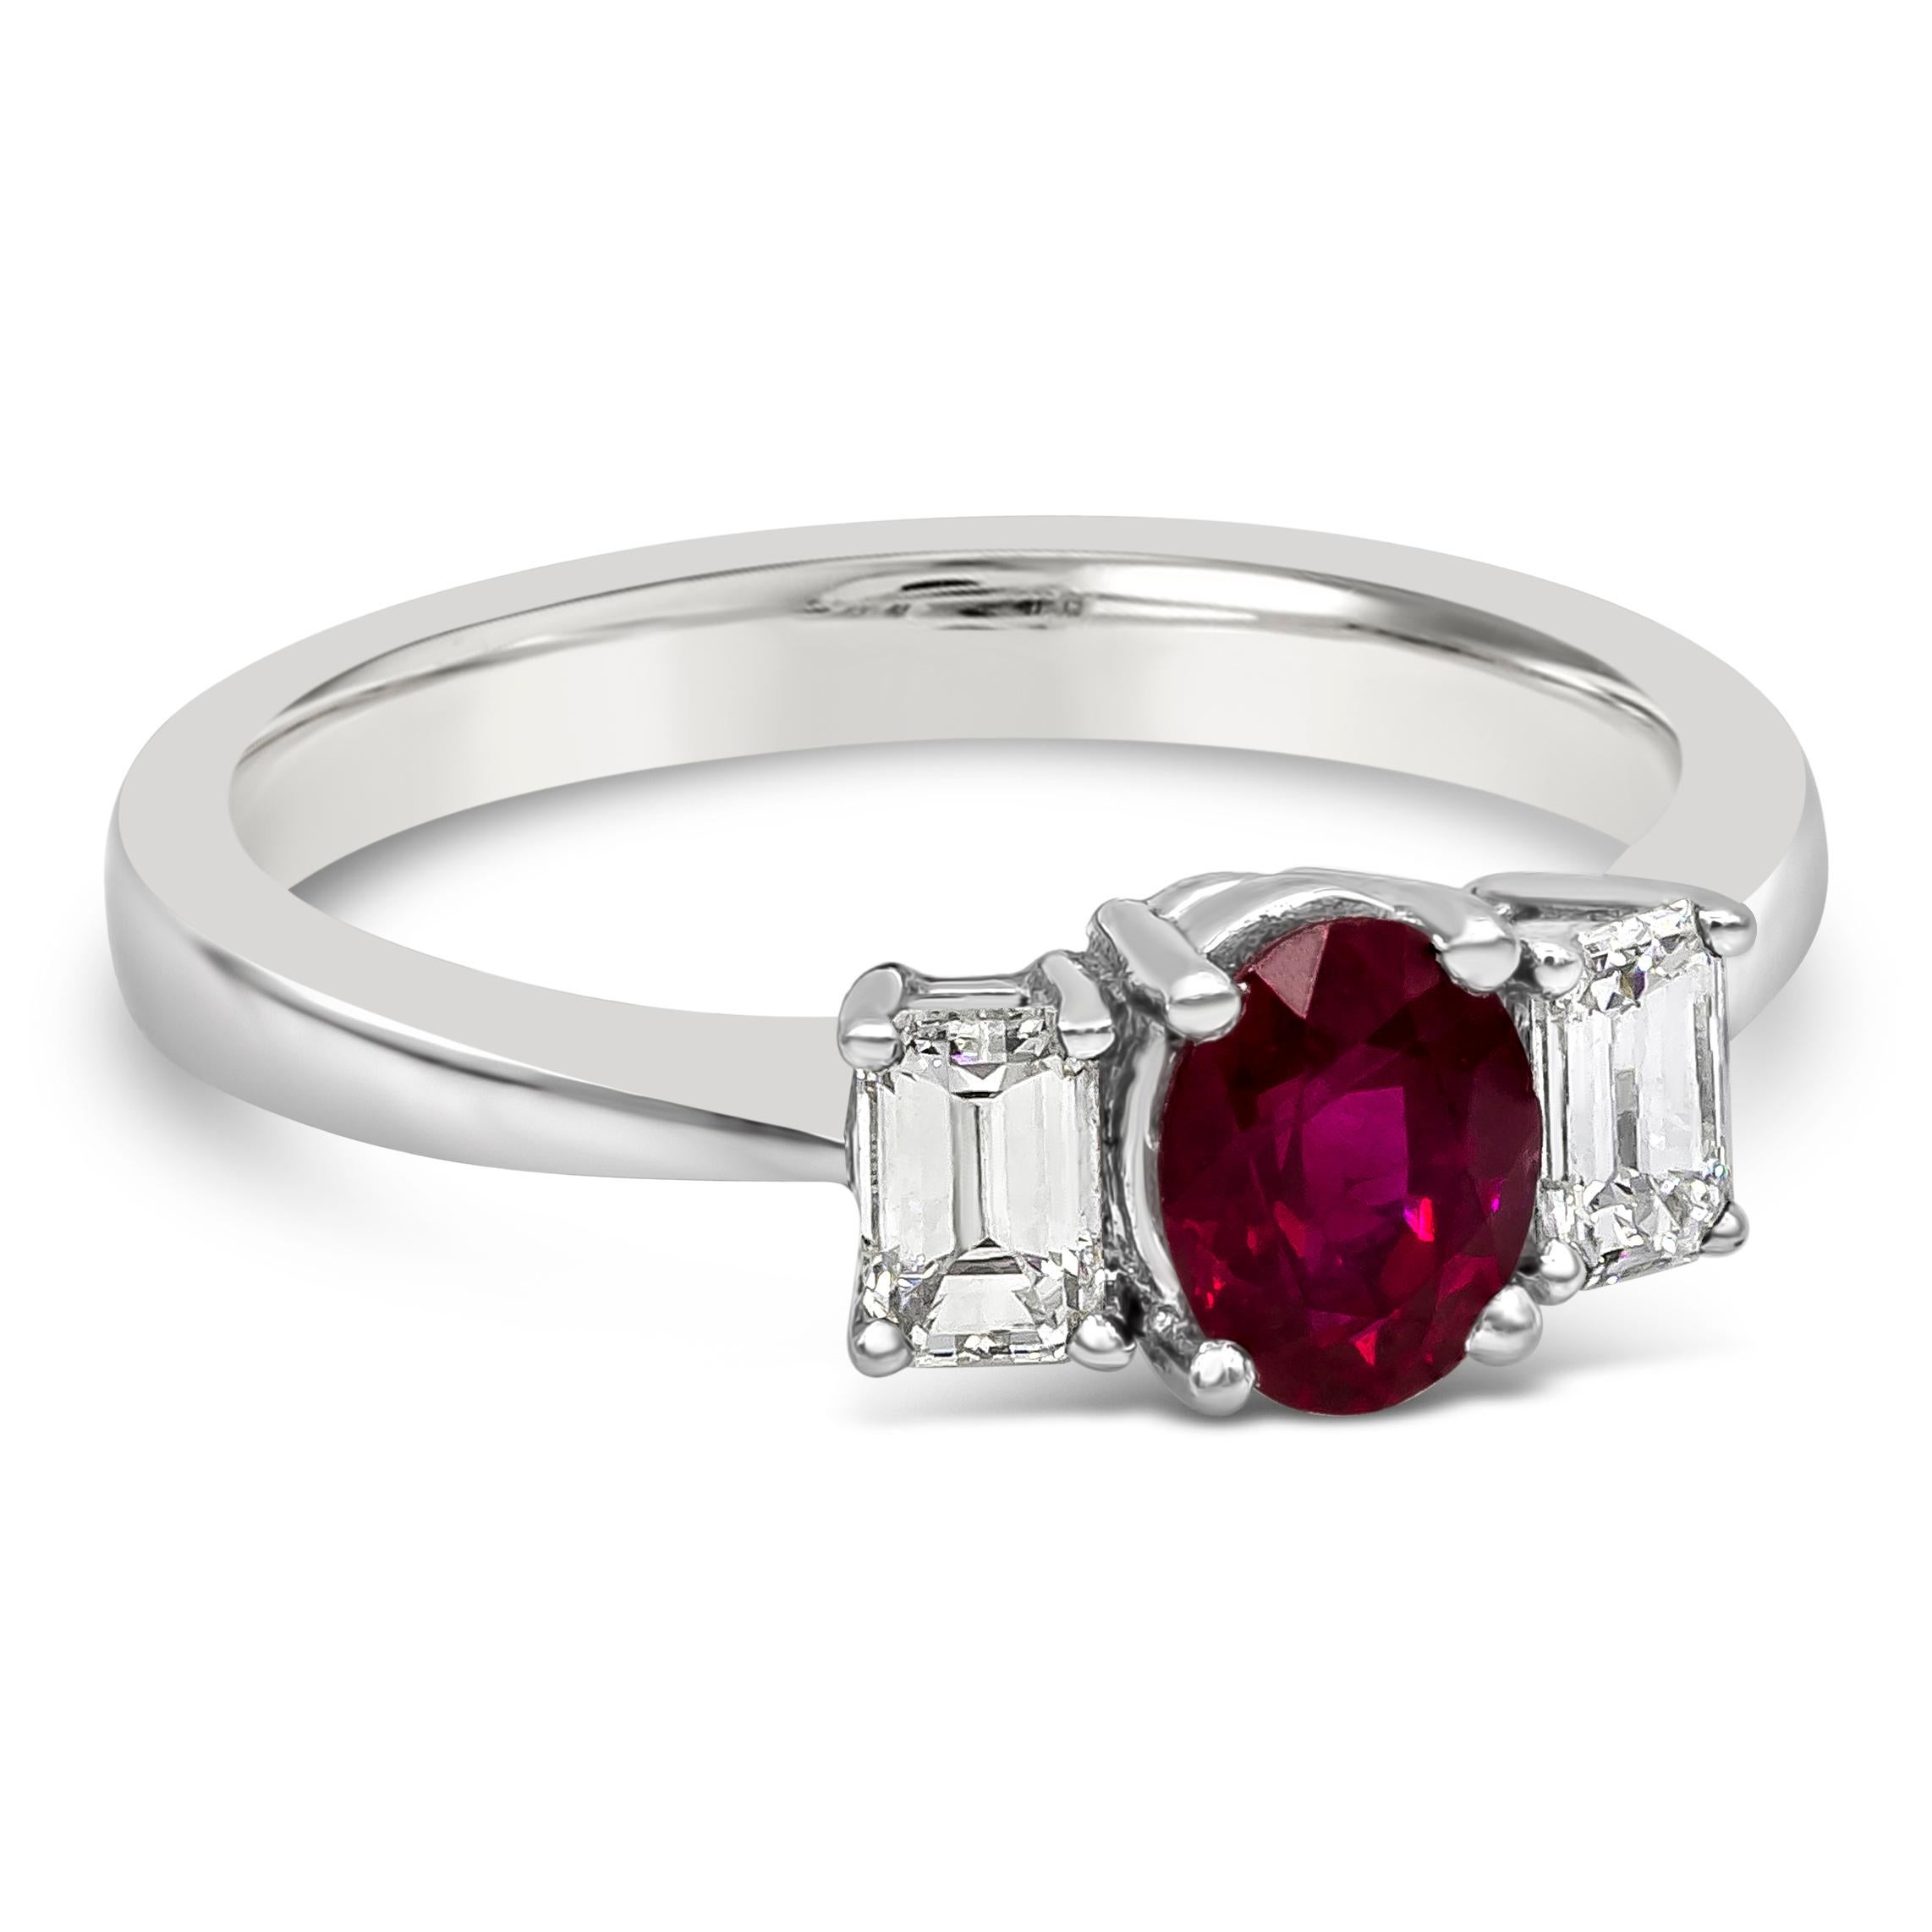 A beautiful gemstone three stone engagement ring style showcasing an oval cut ruby center stone weighing 0.70 carats total. Flanked by an emerald cut diamond on each side weighing 0.41 carats total. Made in 18K White Gold, Size 6.5 US

Roman Malakov